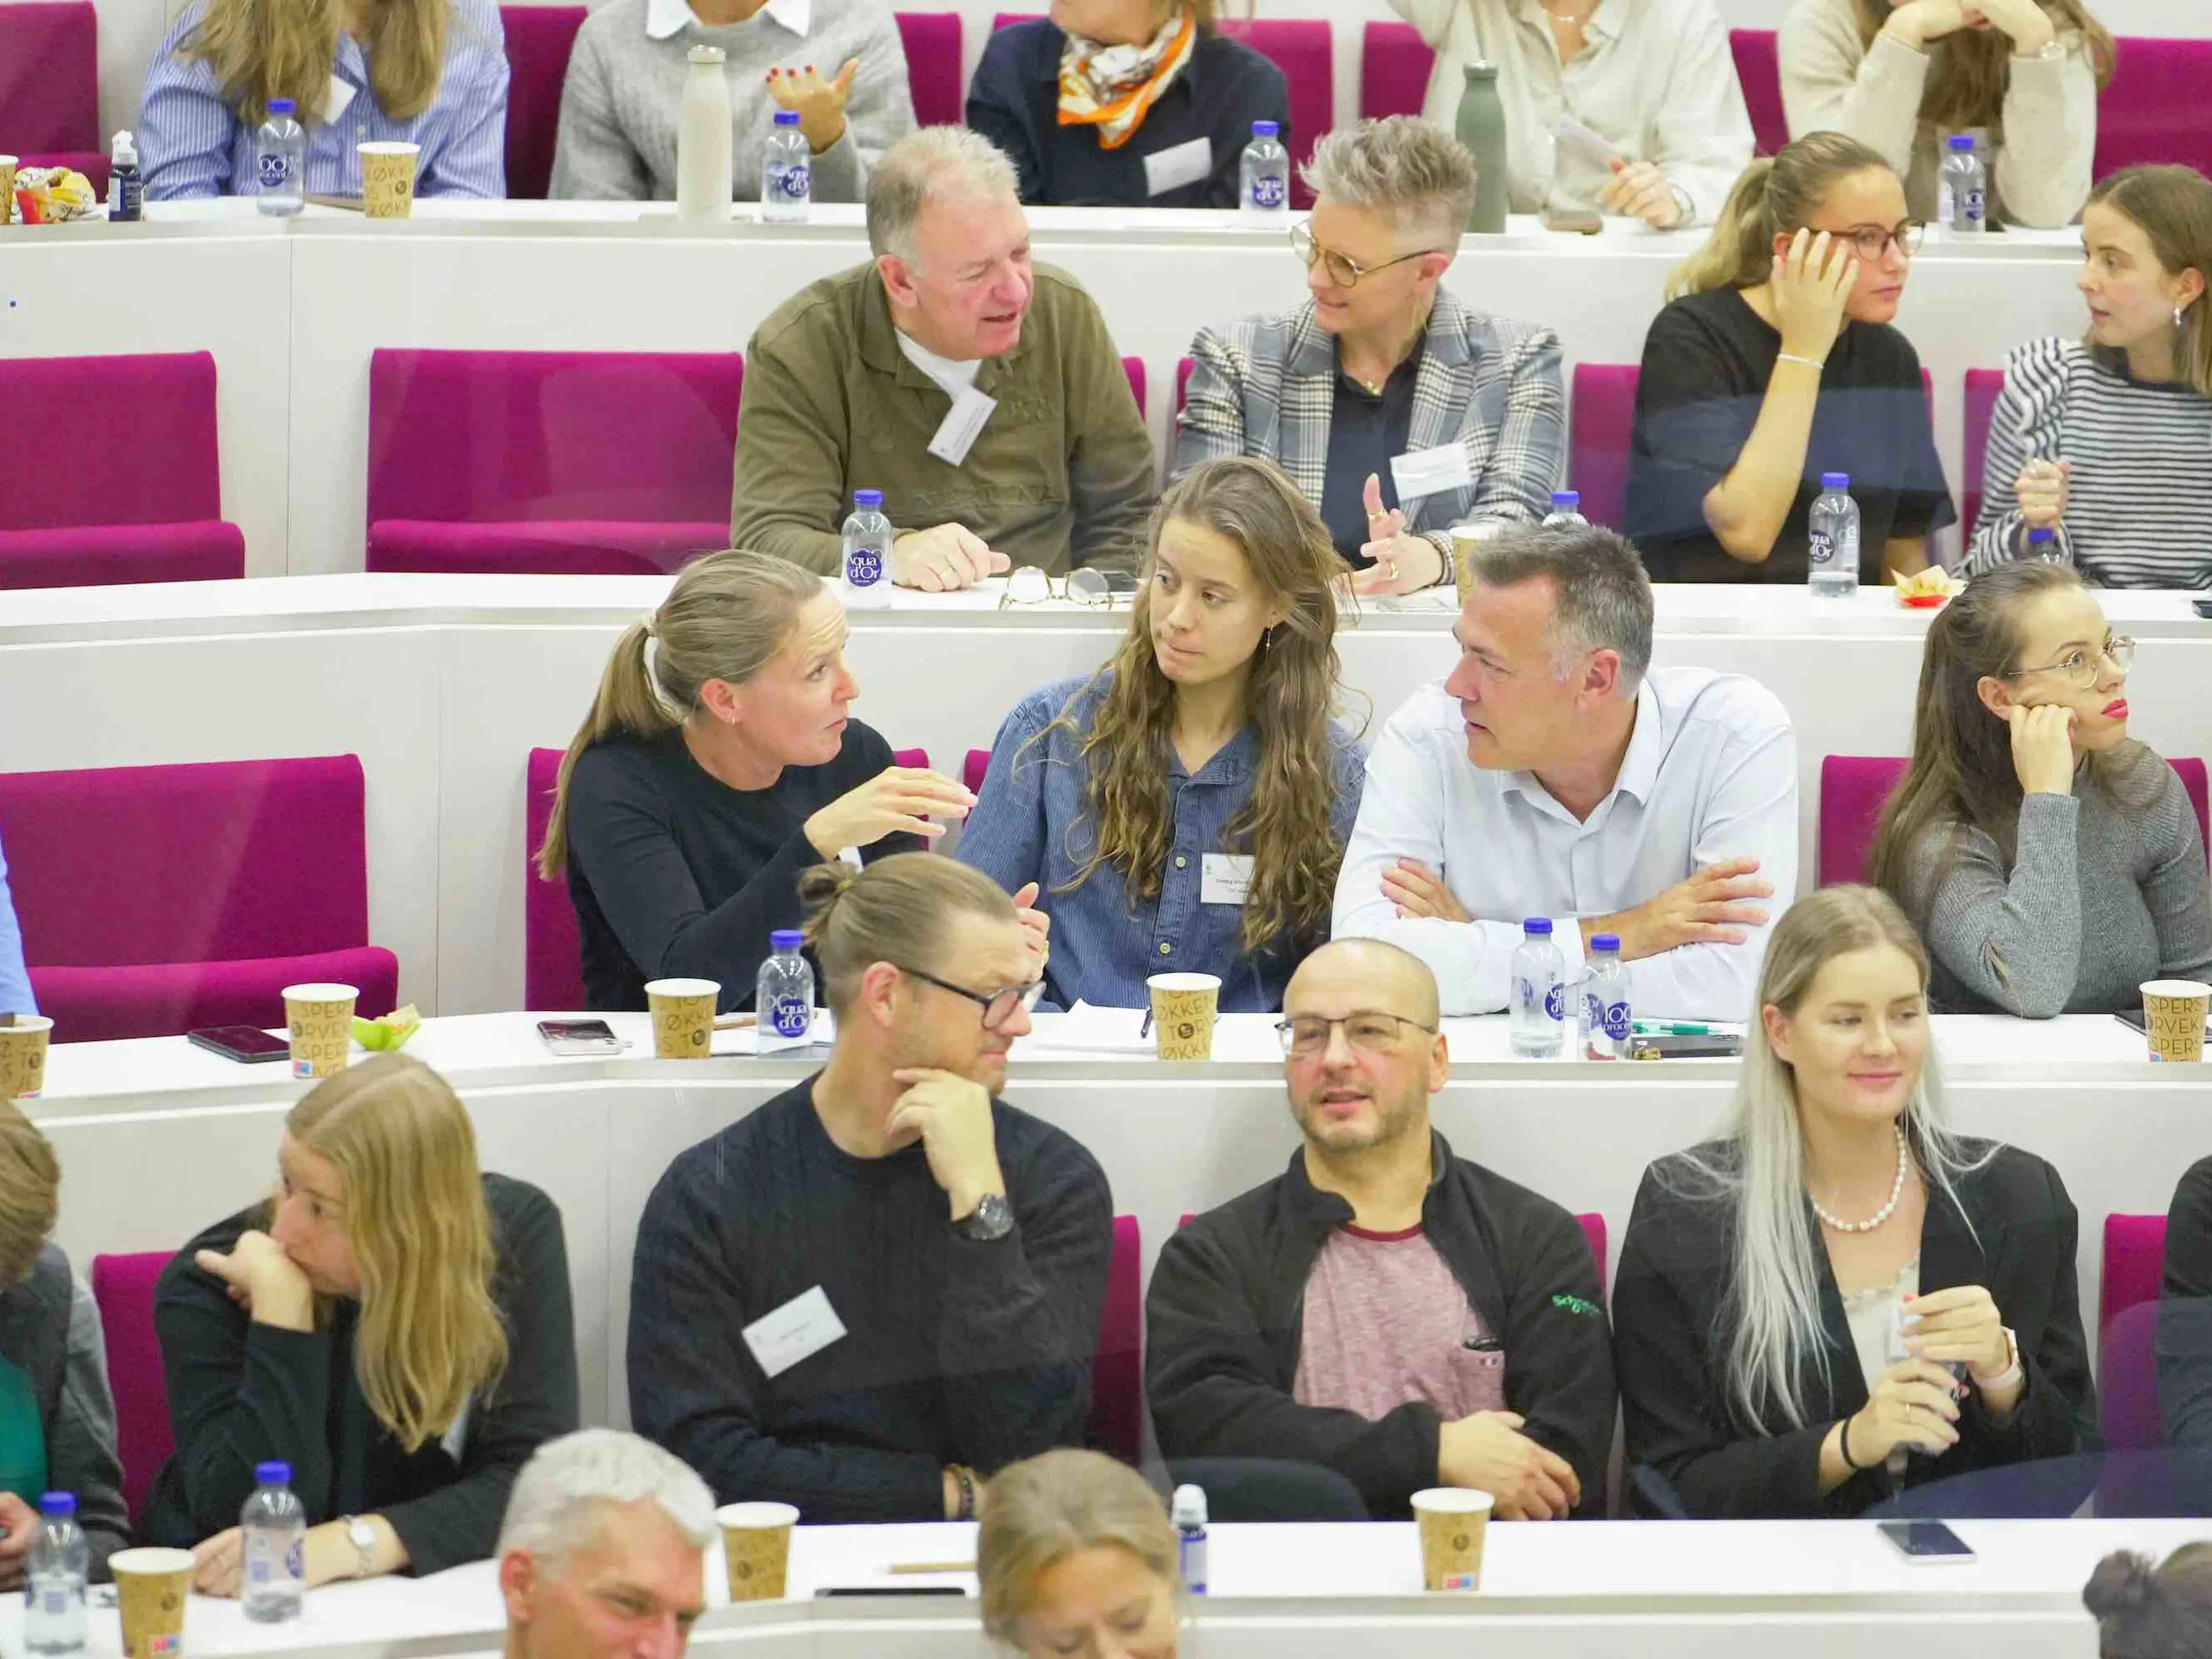 Audience speaking together at the New Management Strategies for New Generations event